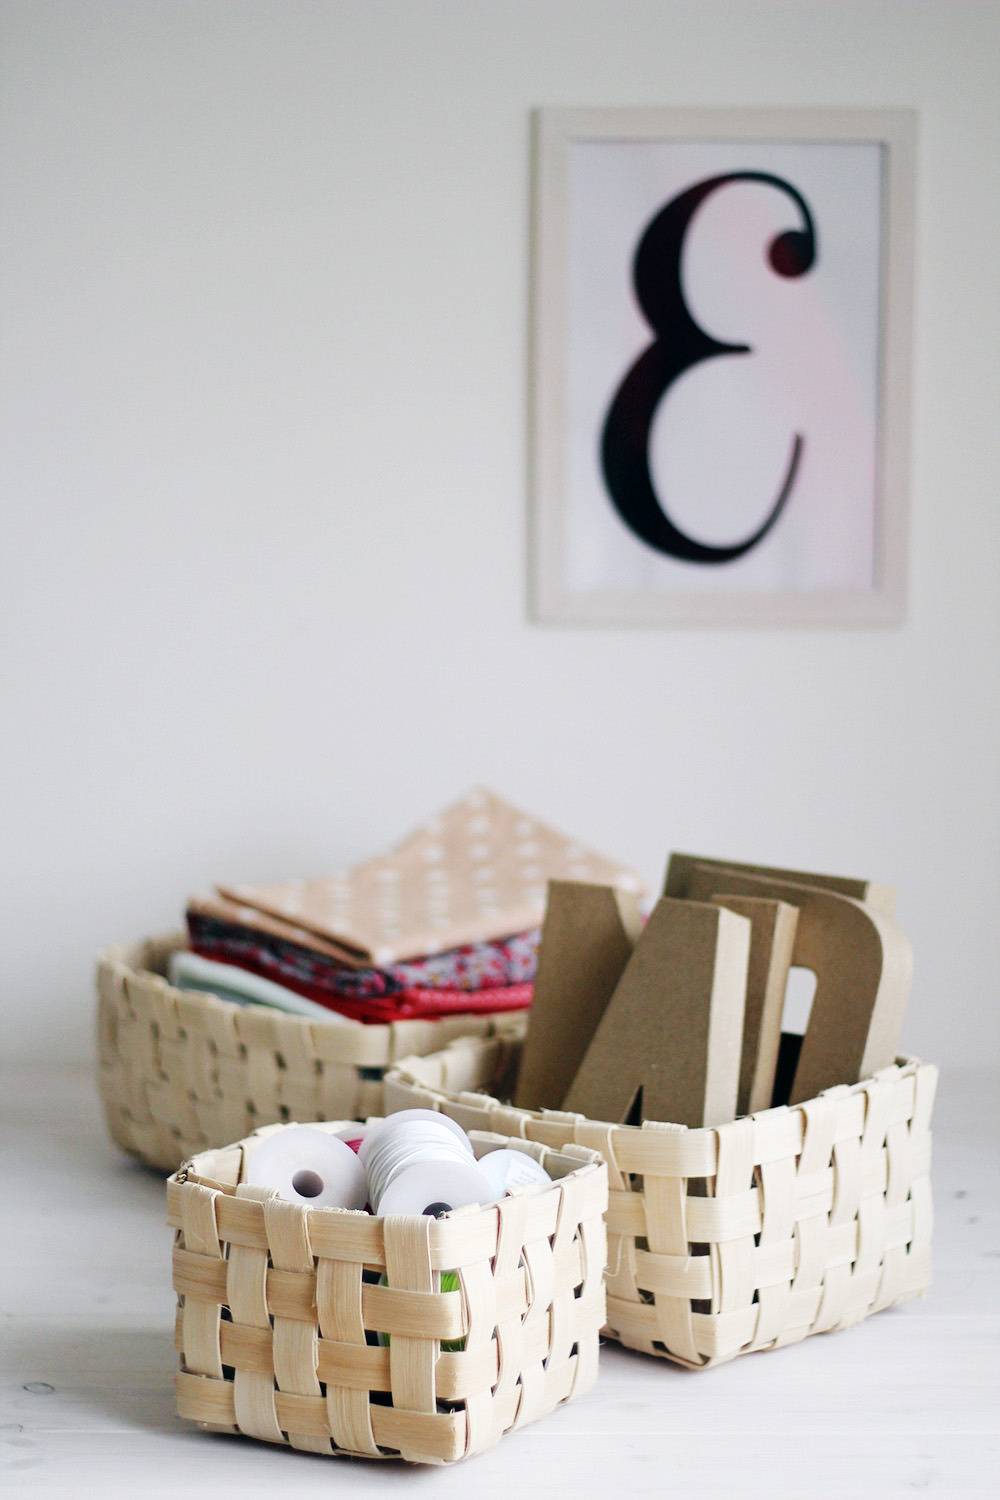 Clothes baskets with cardboard sitting below a picture of an E.